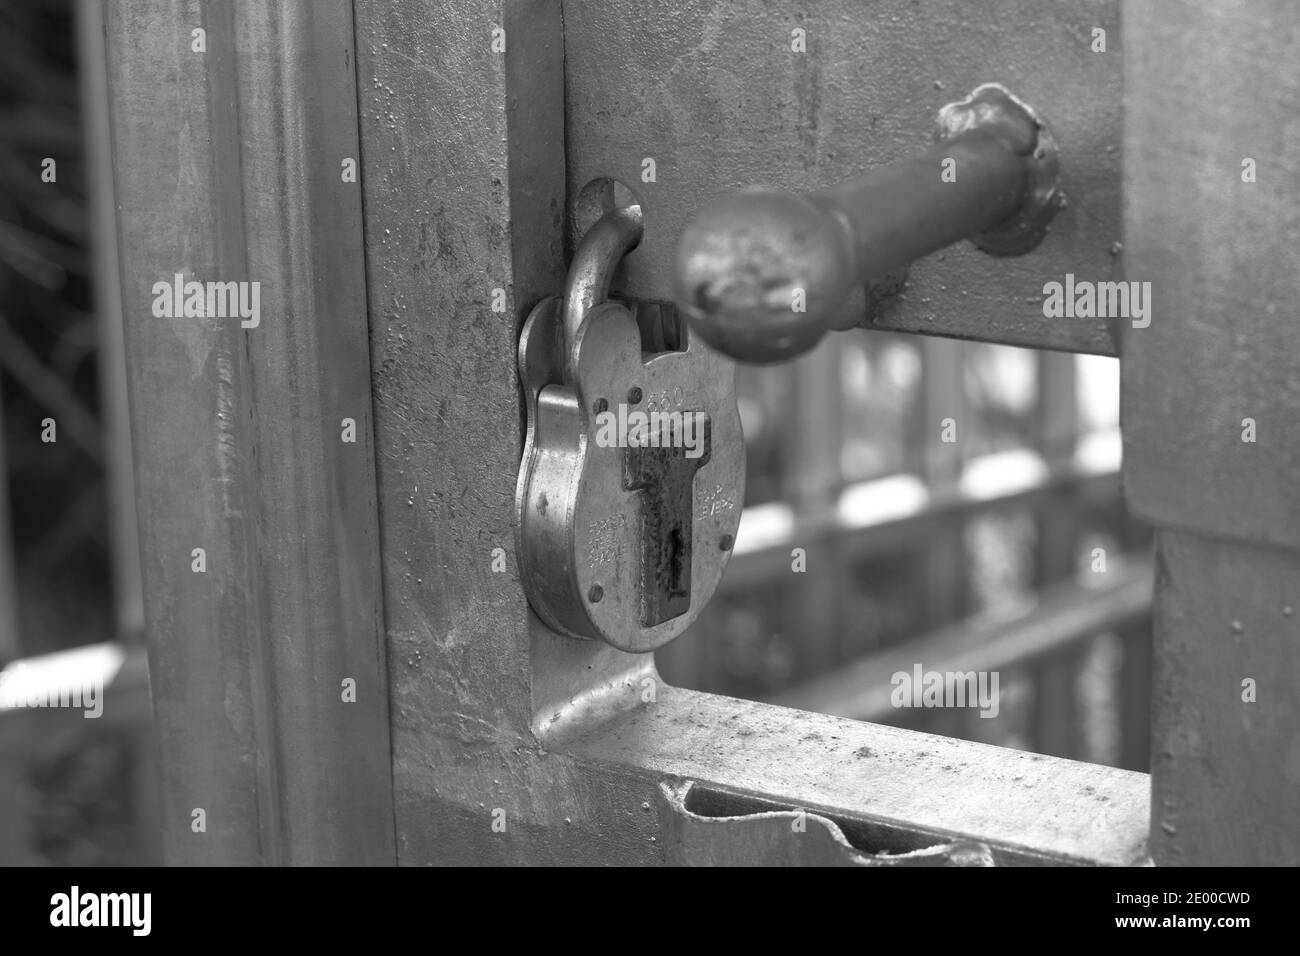 Padlock and bars. Concept for national lock down and restrictions. Monochrome image. Stock Photo